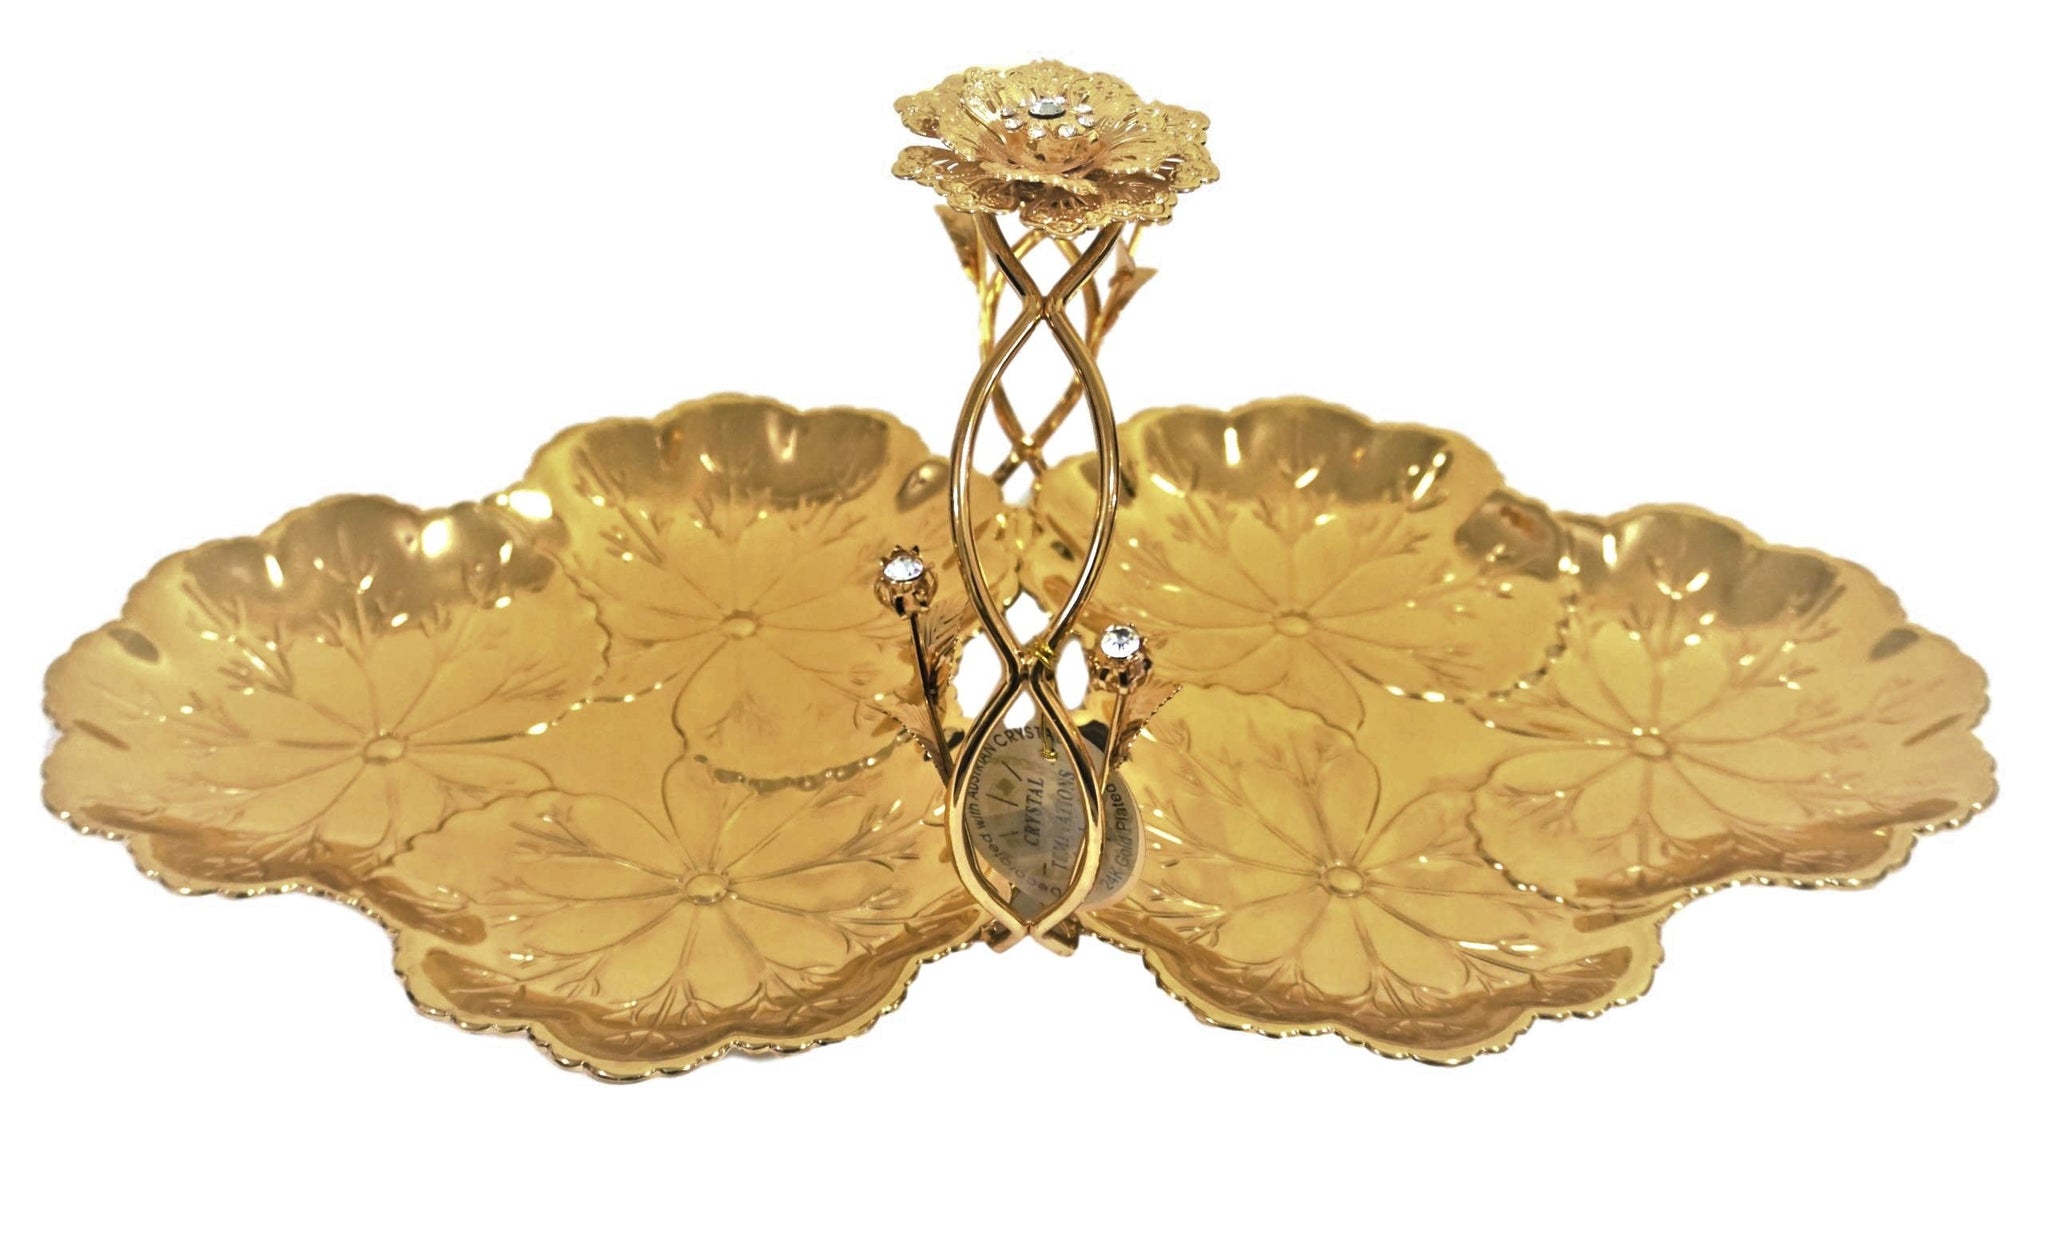 SFP-811669LG : 24K Gold Plated Candy/Fruit Display Dish